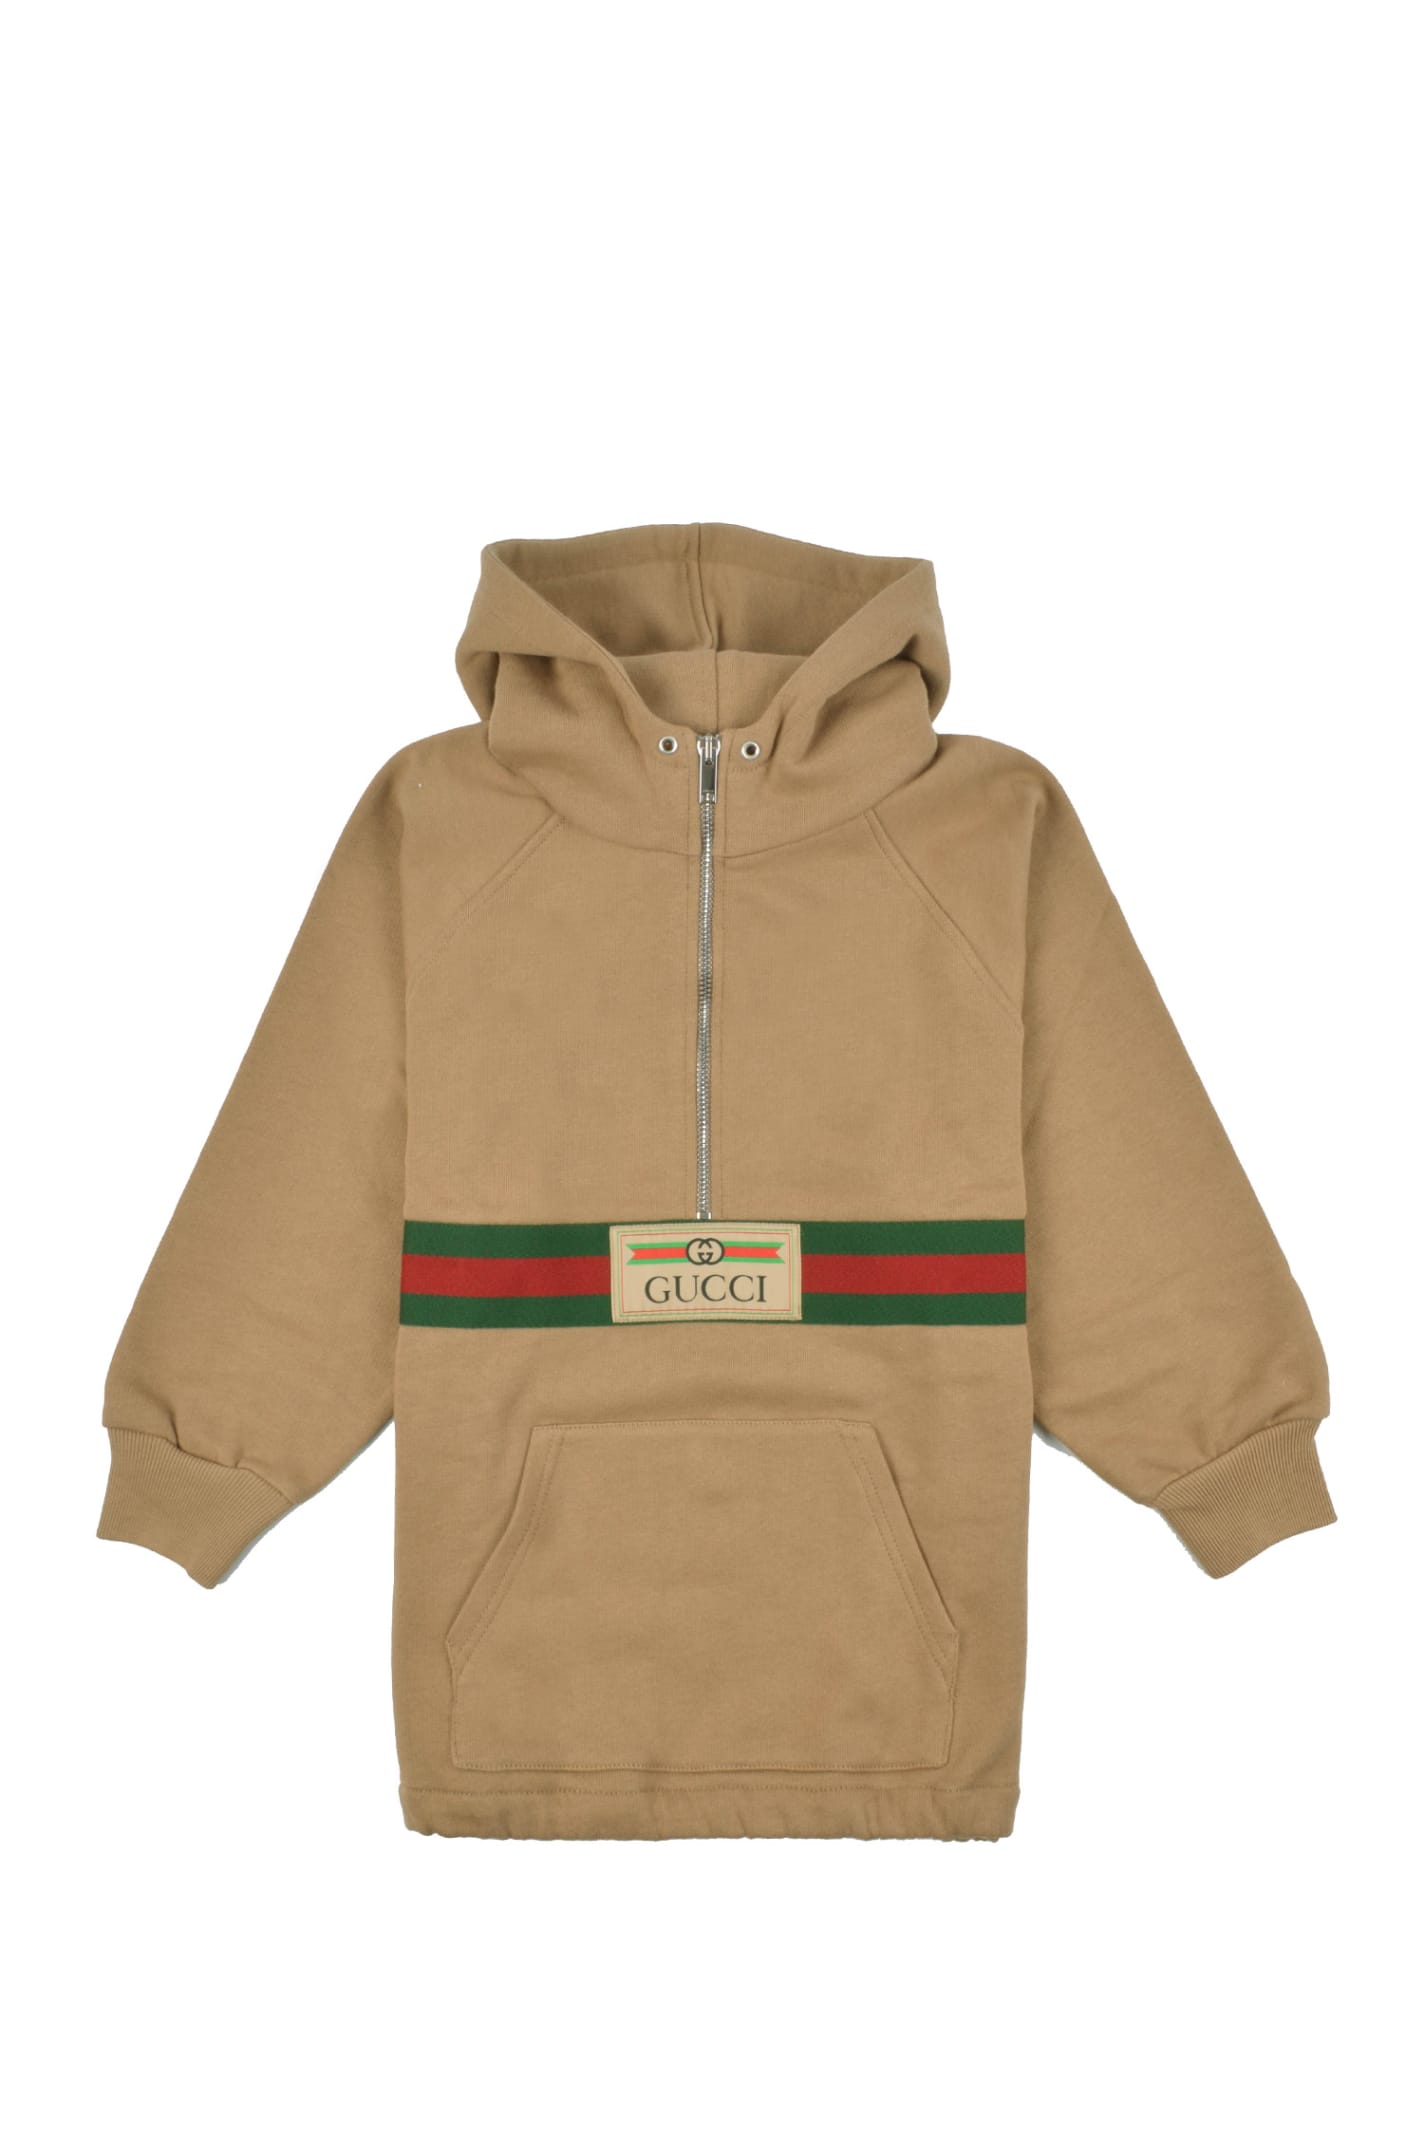 Jacket With Gucci Label